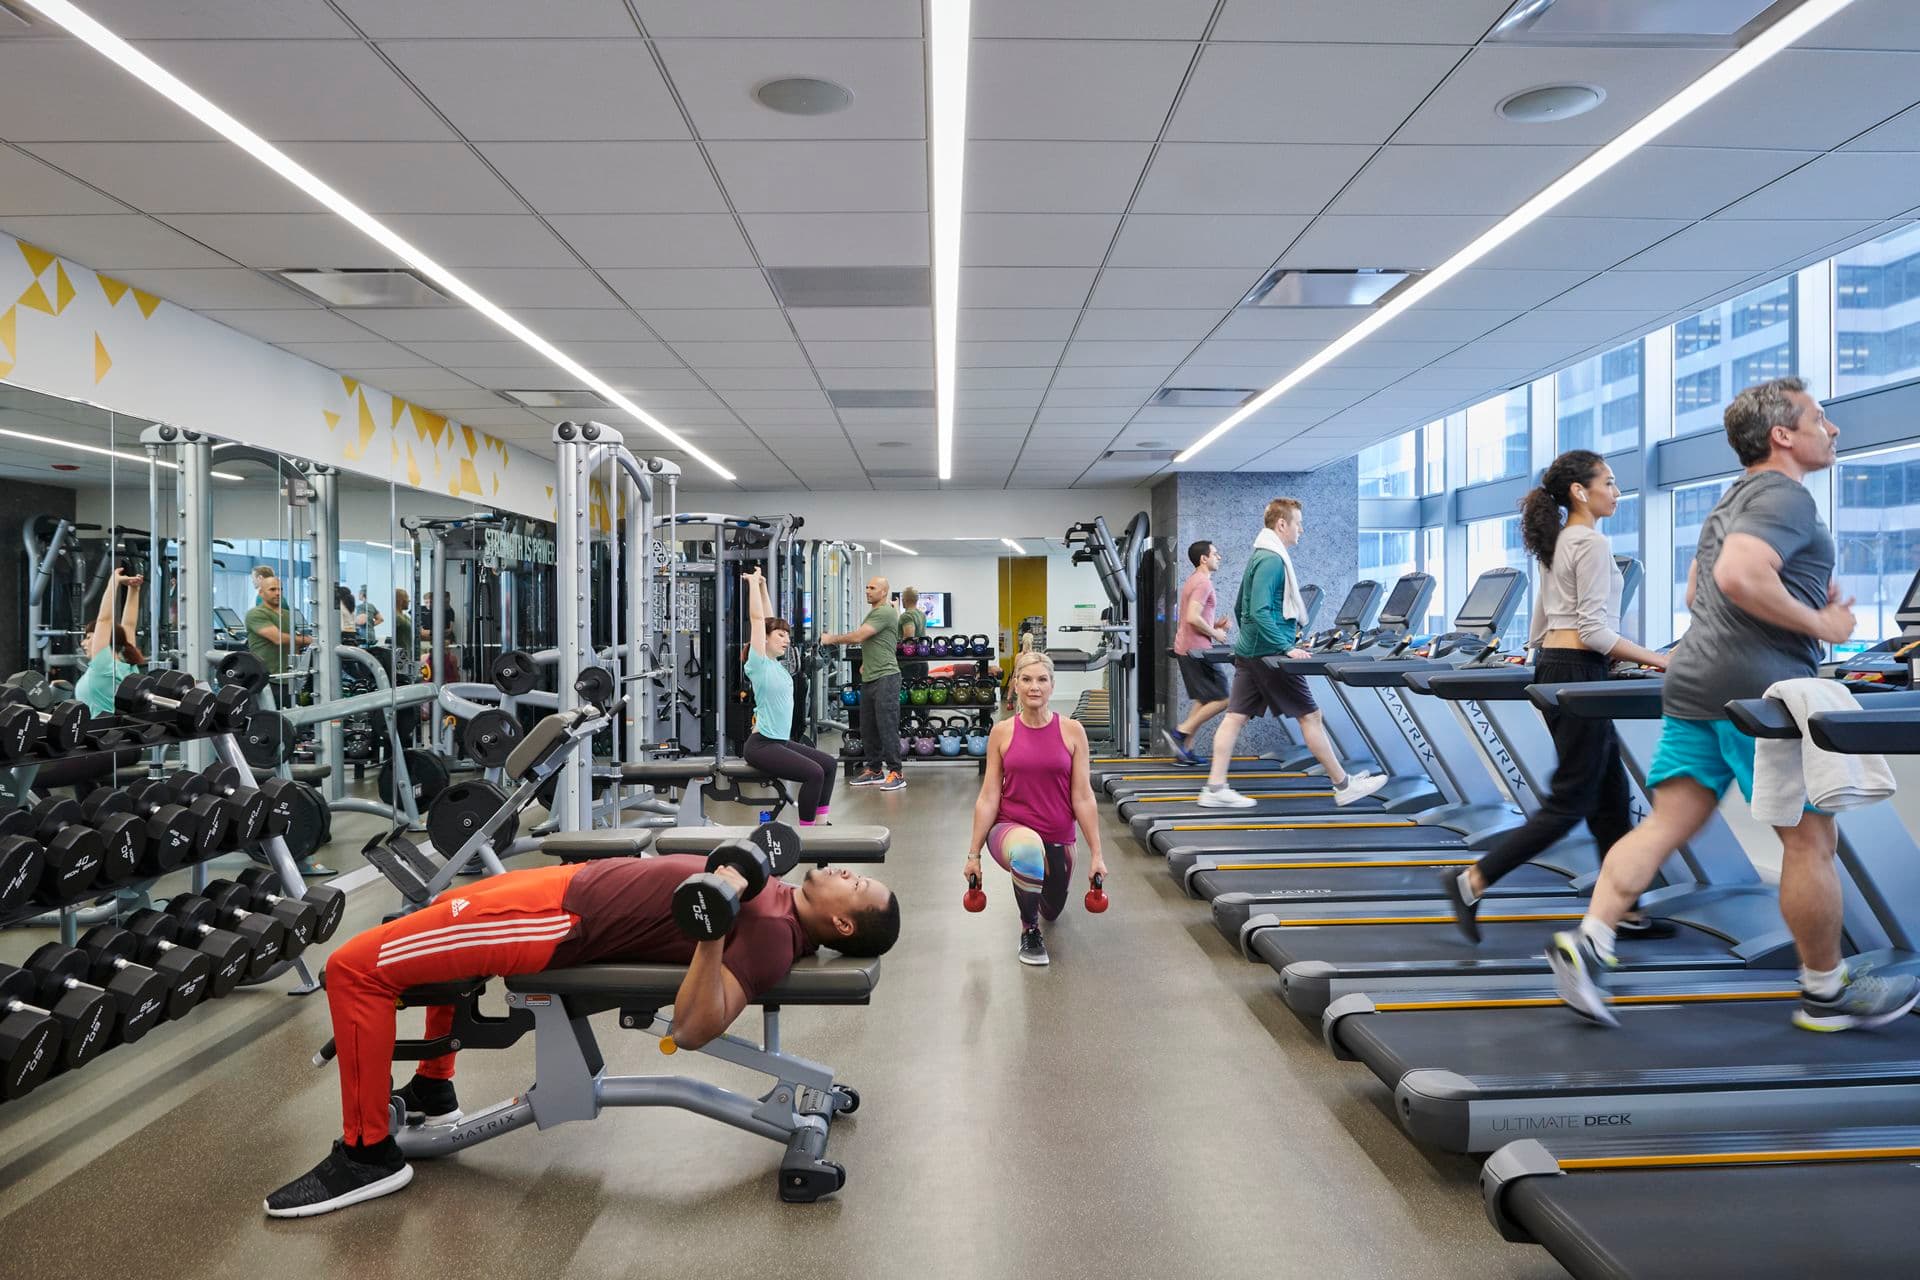 Lifestyle photography photography of the KINETIC fitness center at One North Wacker in Chicago, IL